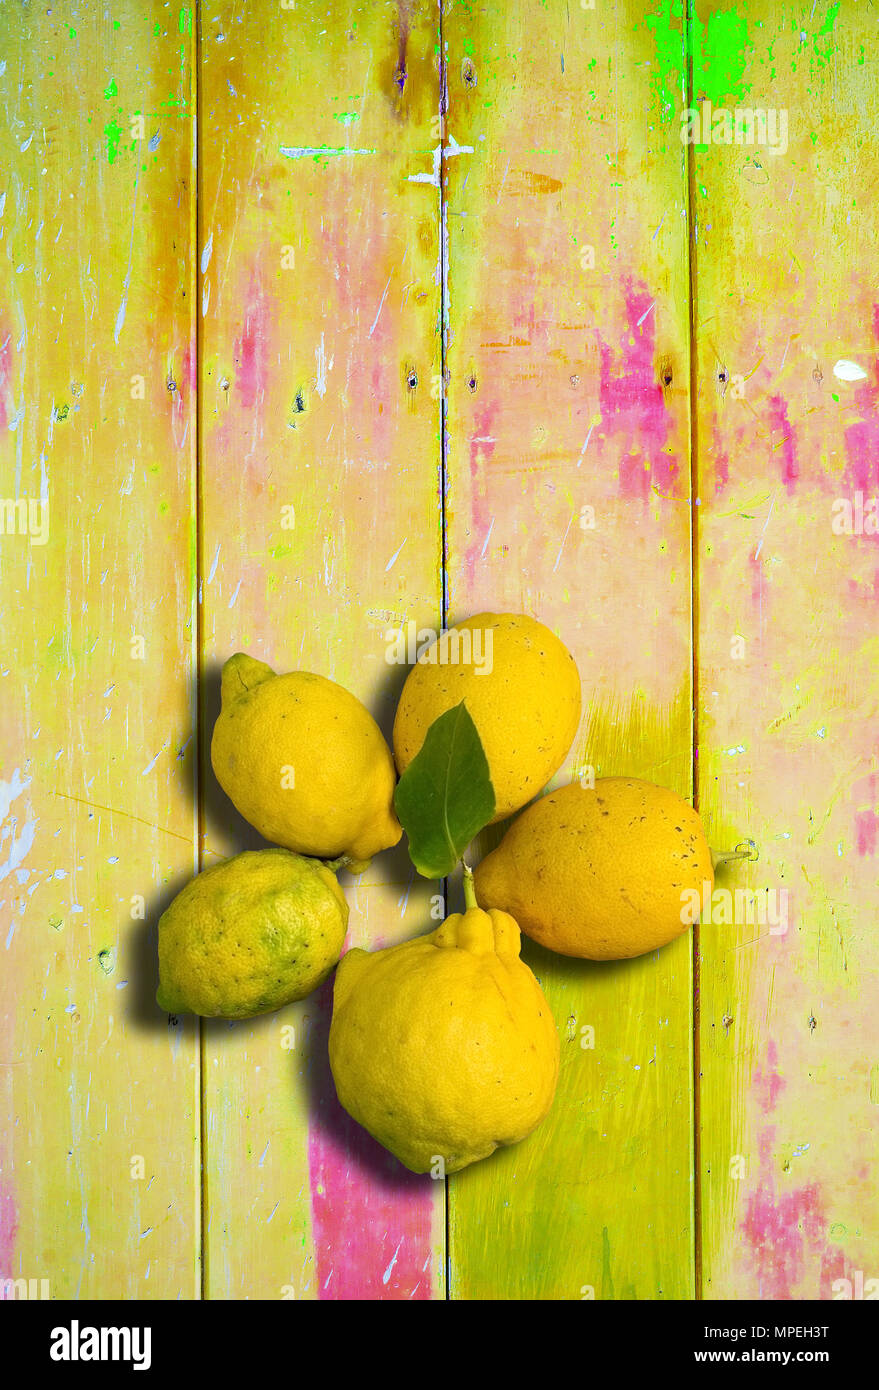 Yellow colorful vintage background with shabby distressed grungy texture hippie style Stock Photo